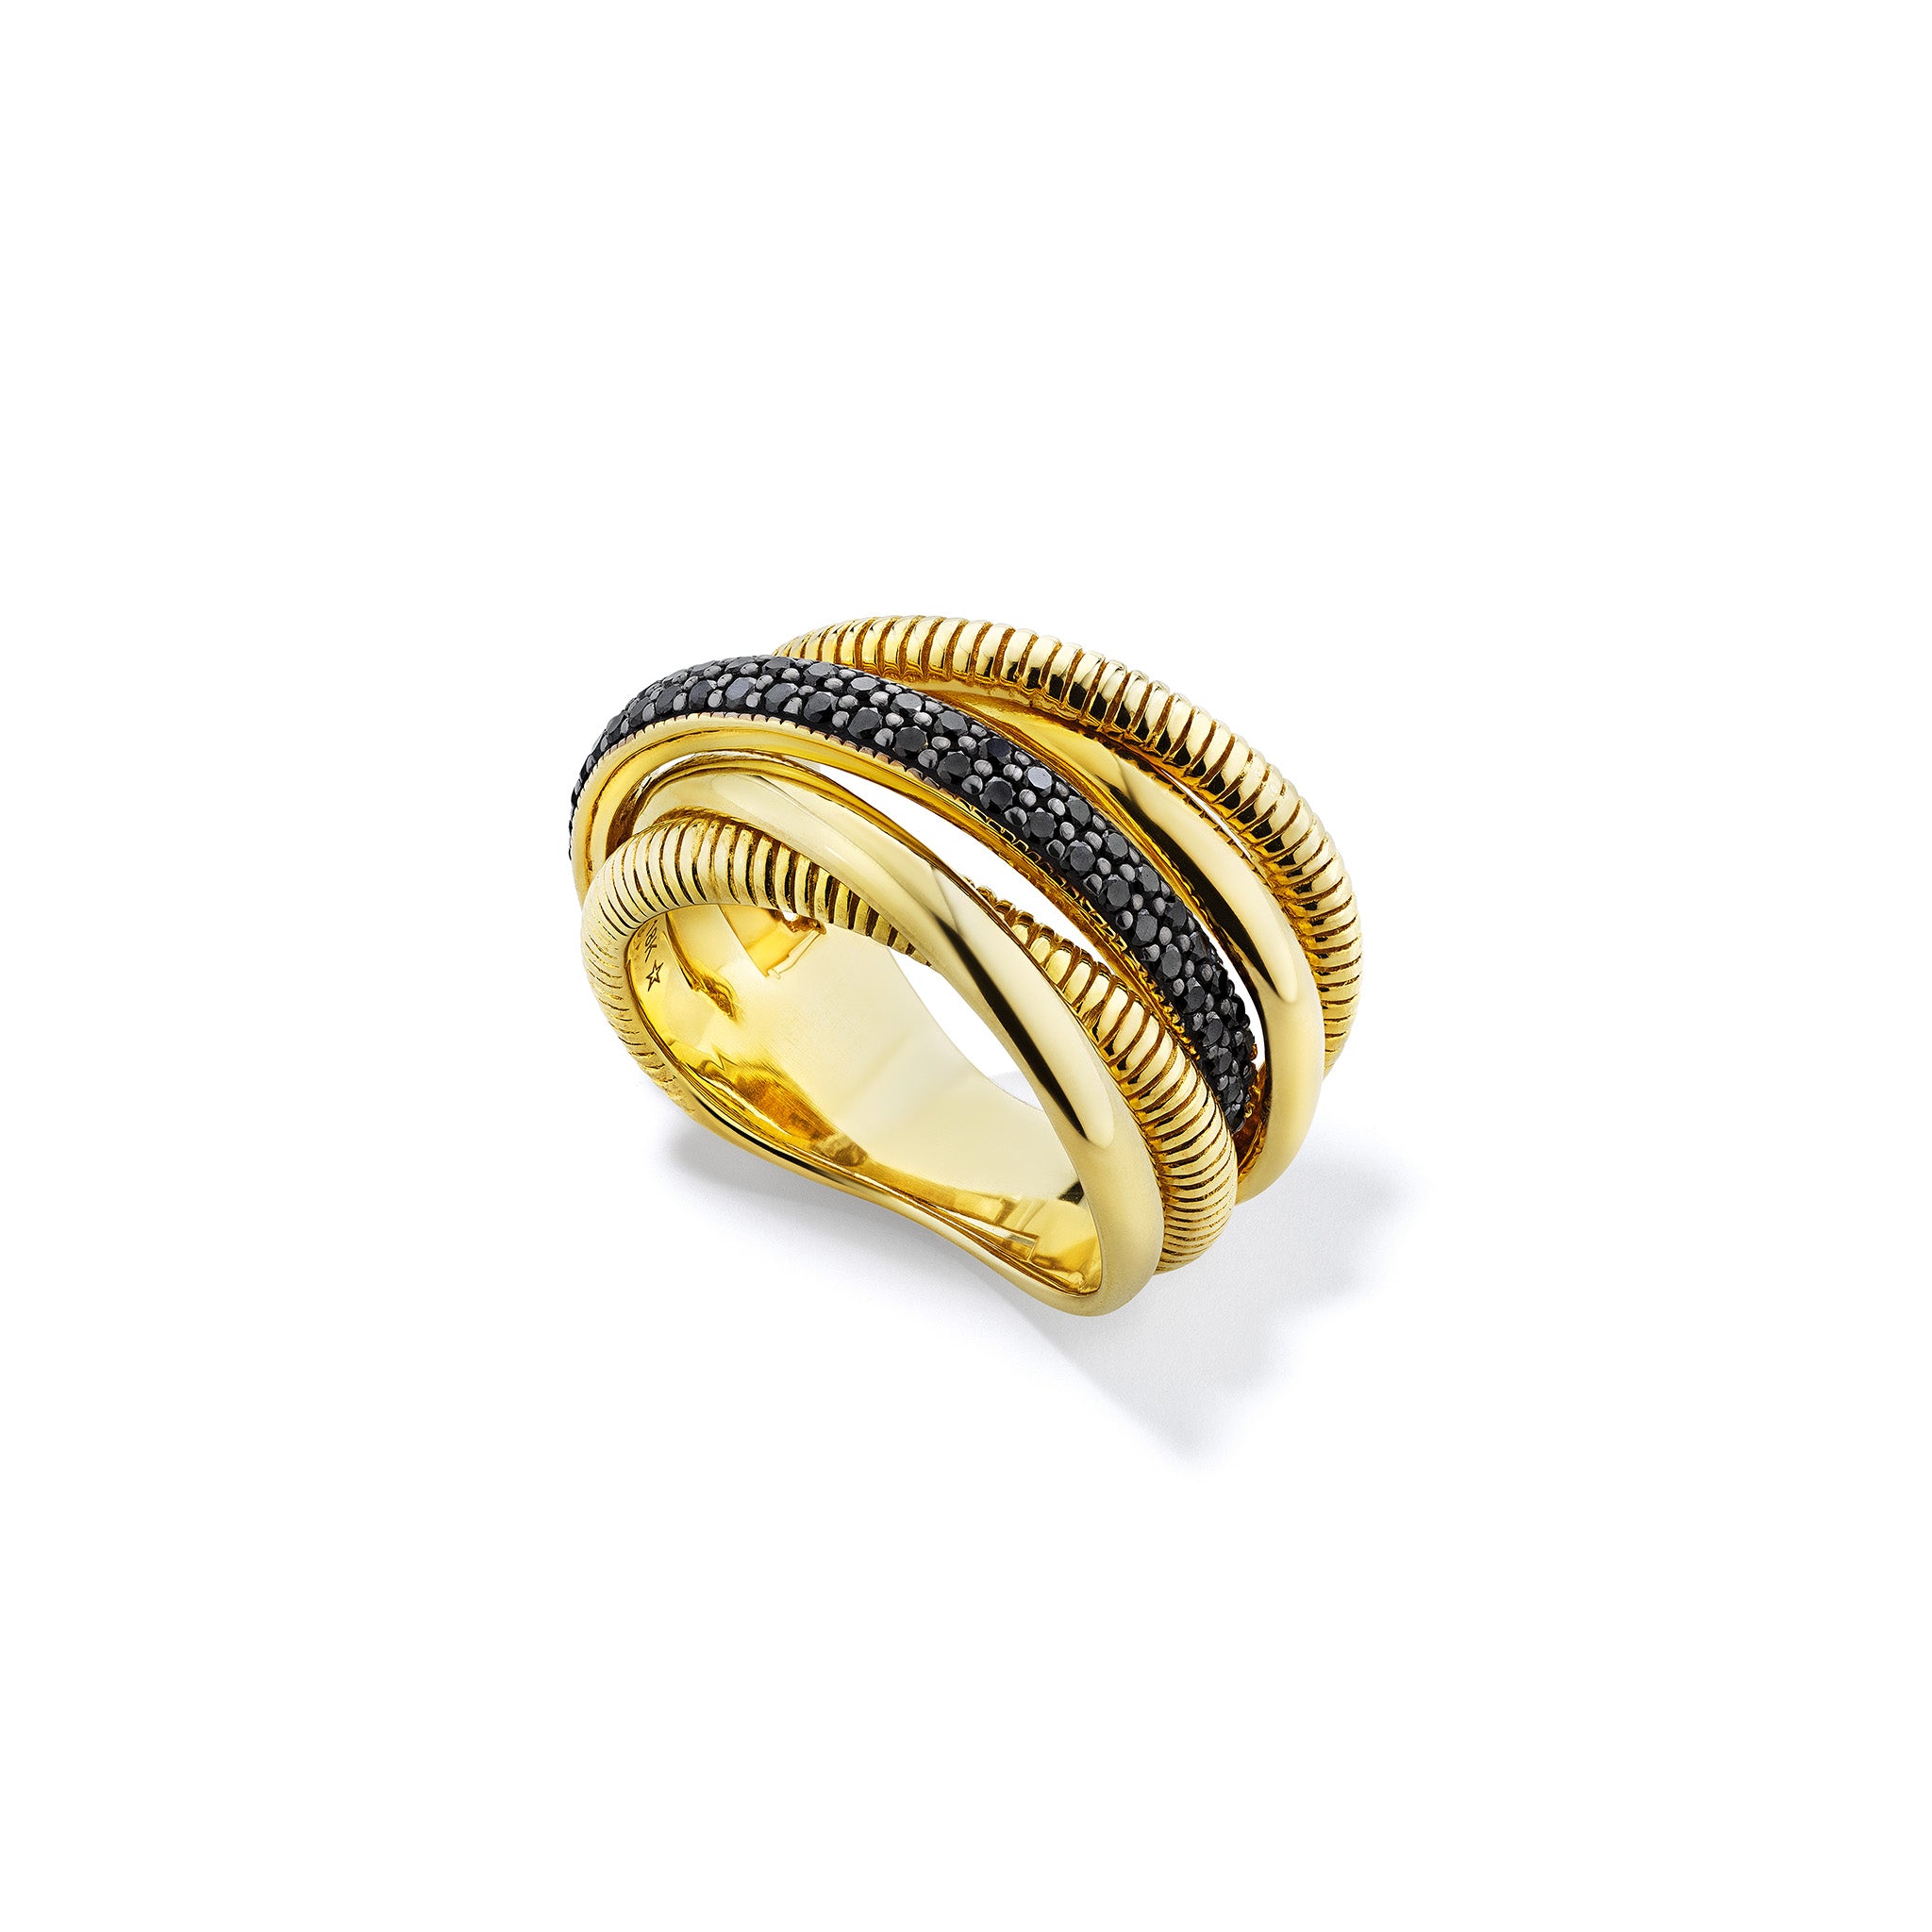 Eternity Five Band Highway Ring with Black Diamonds in 18K